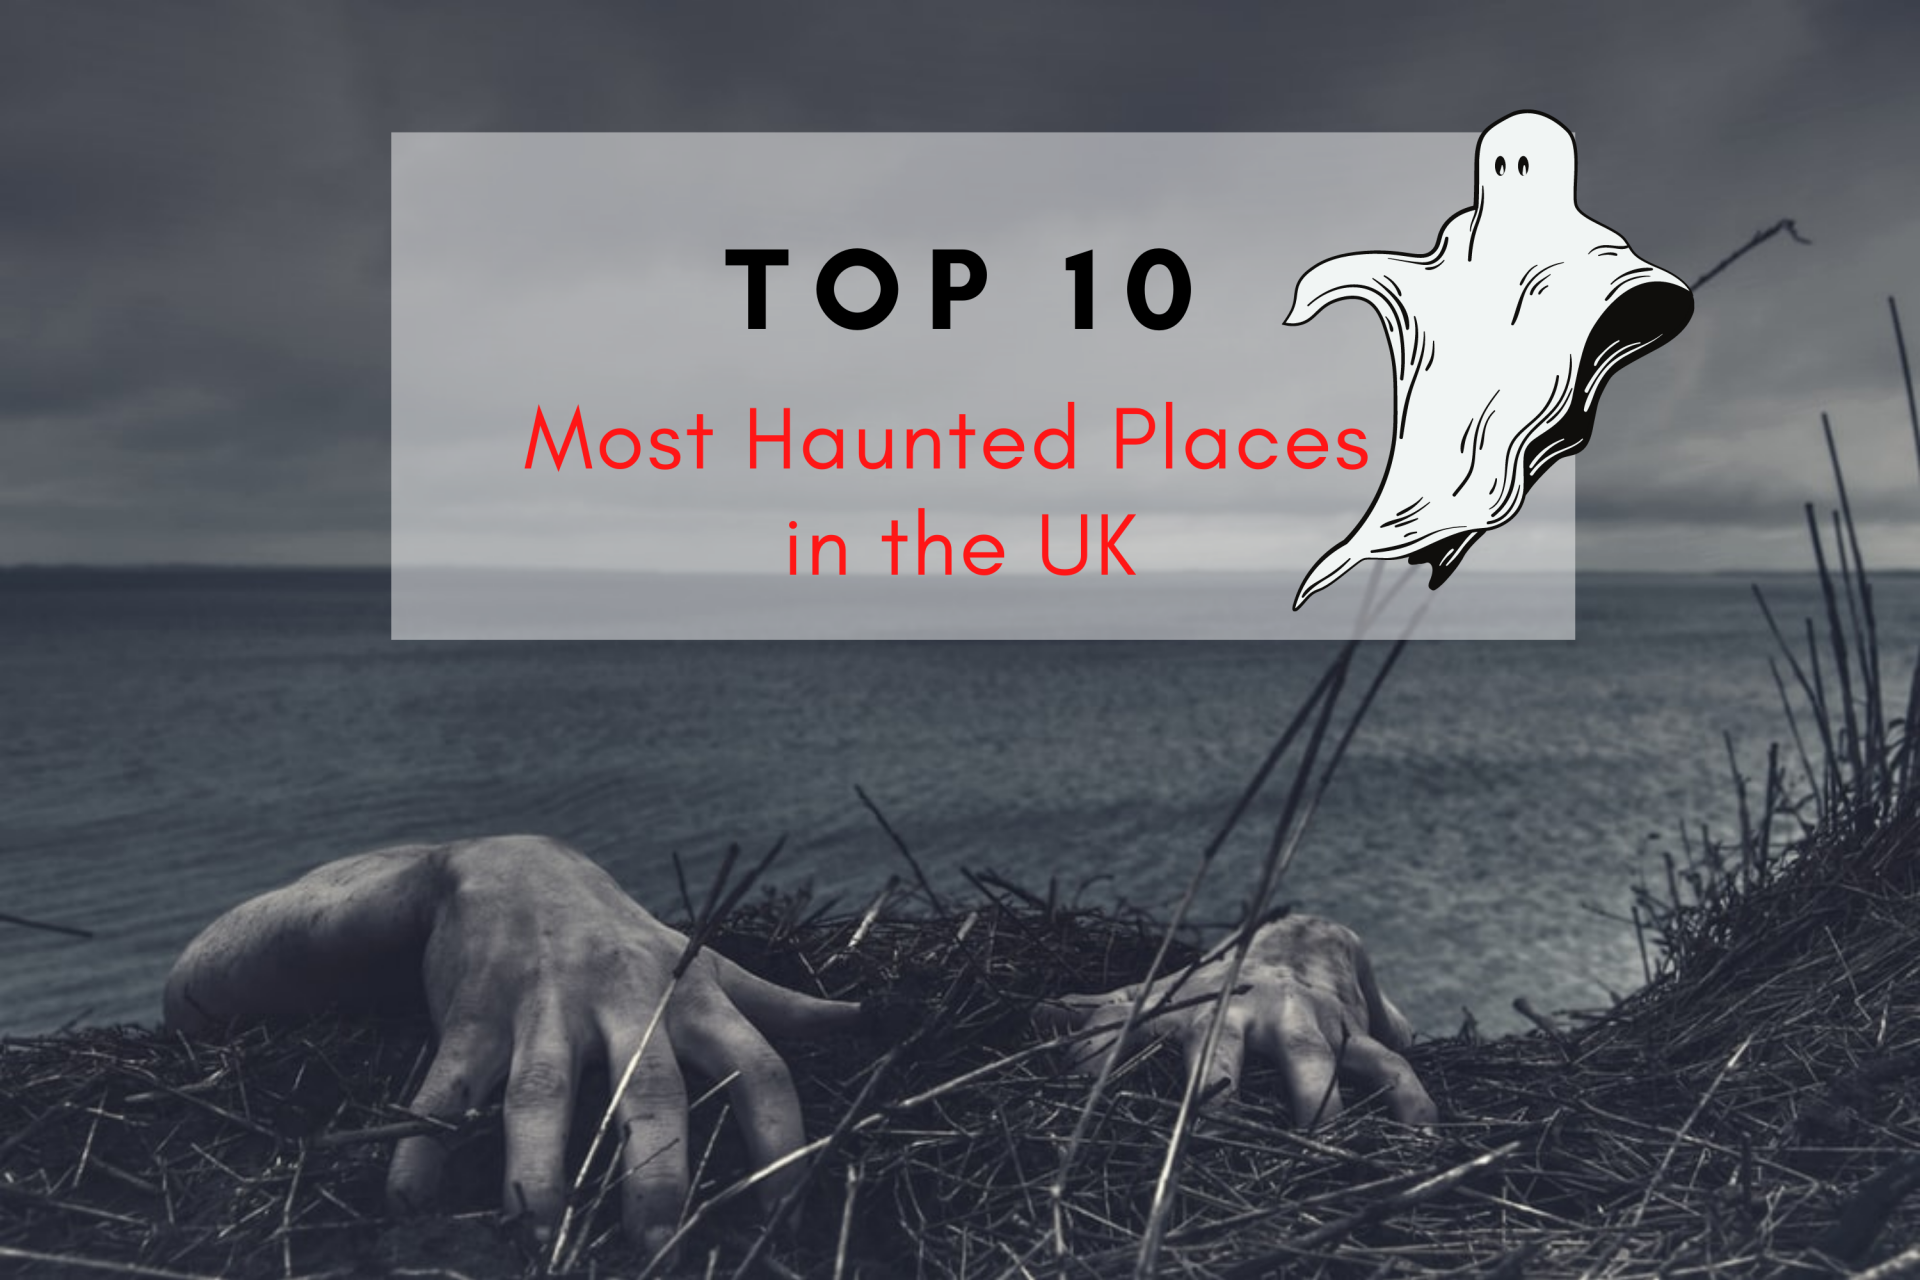 Top 10 Most Haunted & Ghost Places in The UK